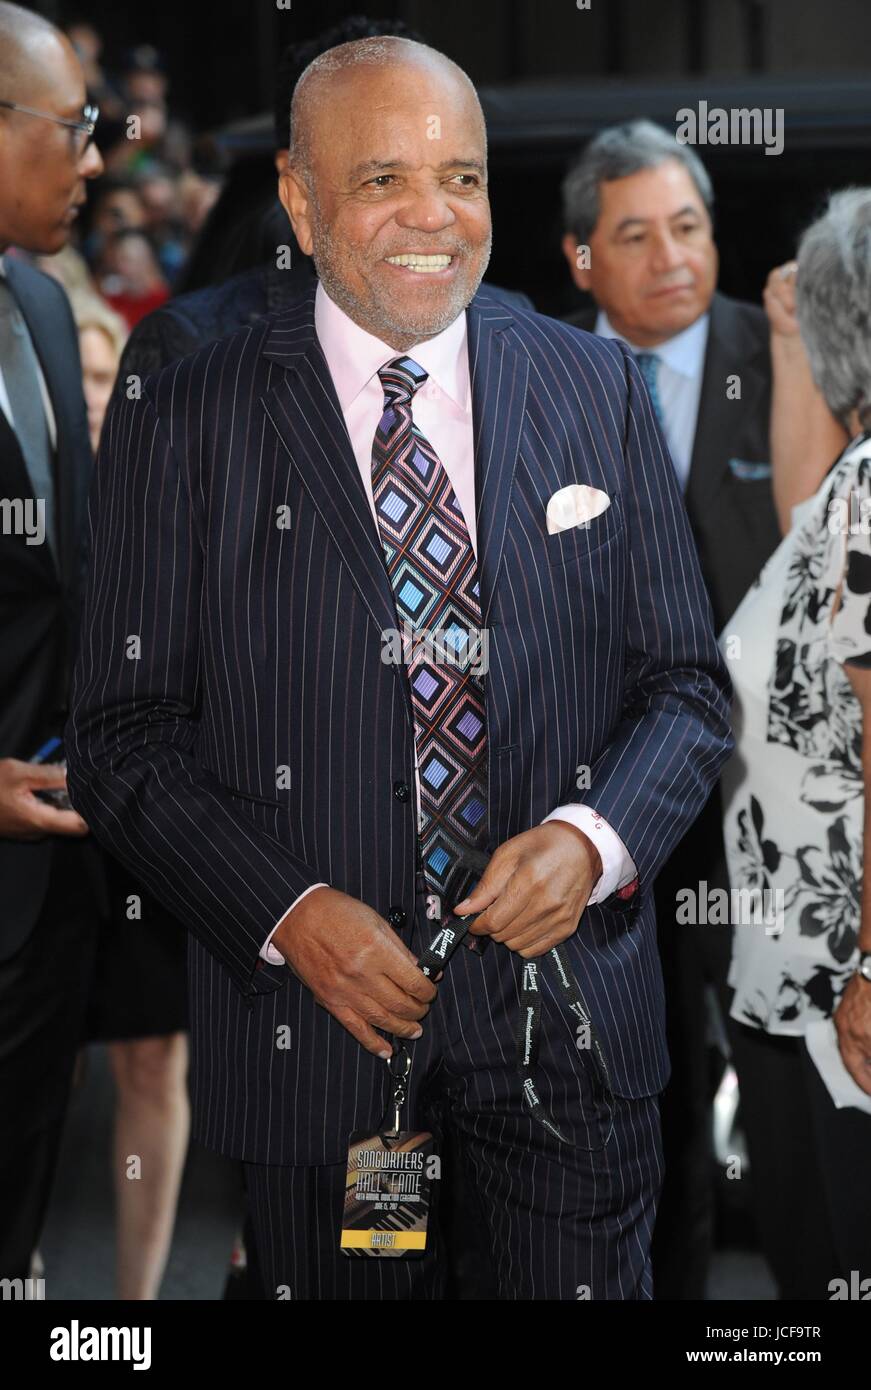 New York, NY, USA. 15th June, 2017. Berry Gordy Jr at arrivals for Songwriters Hall Of Fame 2017 48th Annual Induction And Awards Gala, New York Marriott Marquis, New York, NY June 15, 2017. Credit: Kristin Callahan/Everett Collection/Alamy Live News Stock Photo